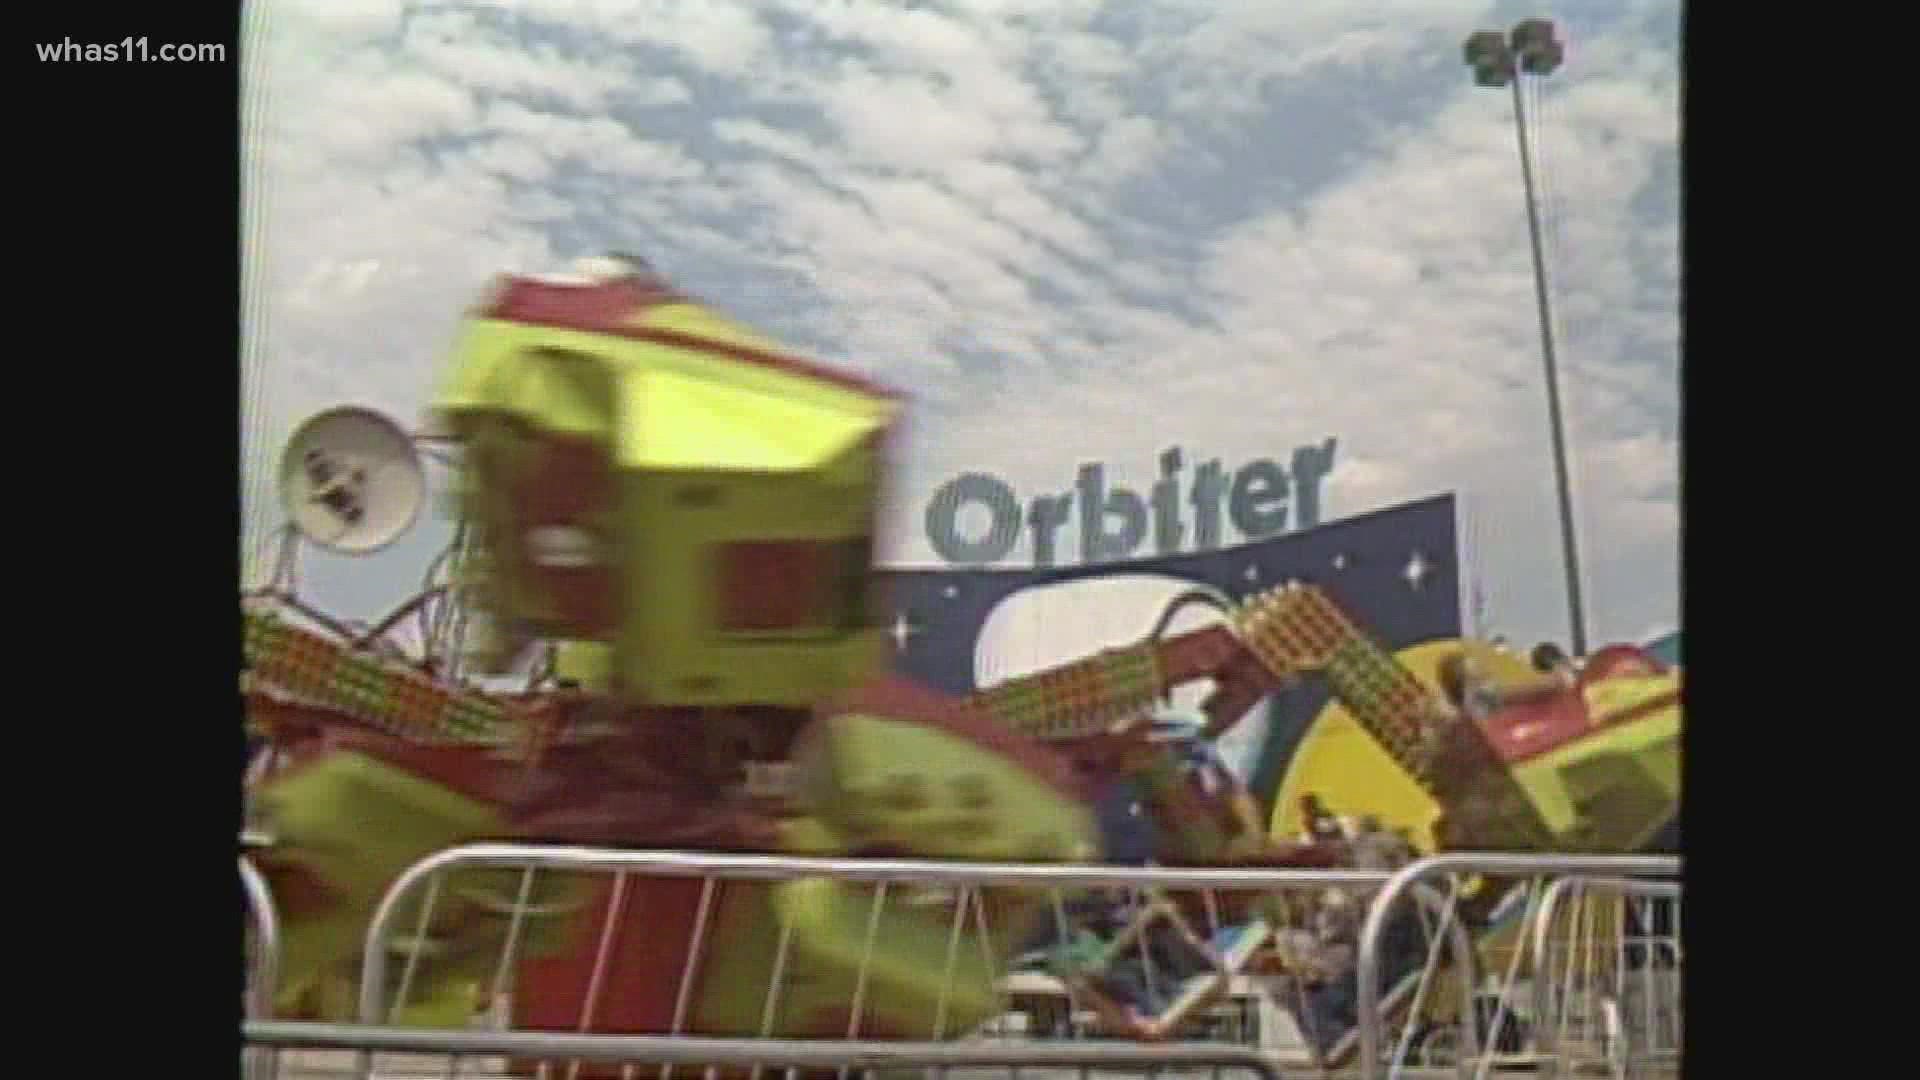 The Kentucky State Fair has evolved over the years, we go inside of the WHAS11 Vault to check out some of the great memories of past fairs.